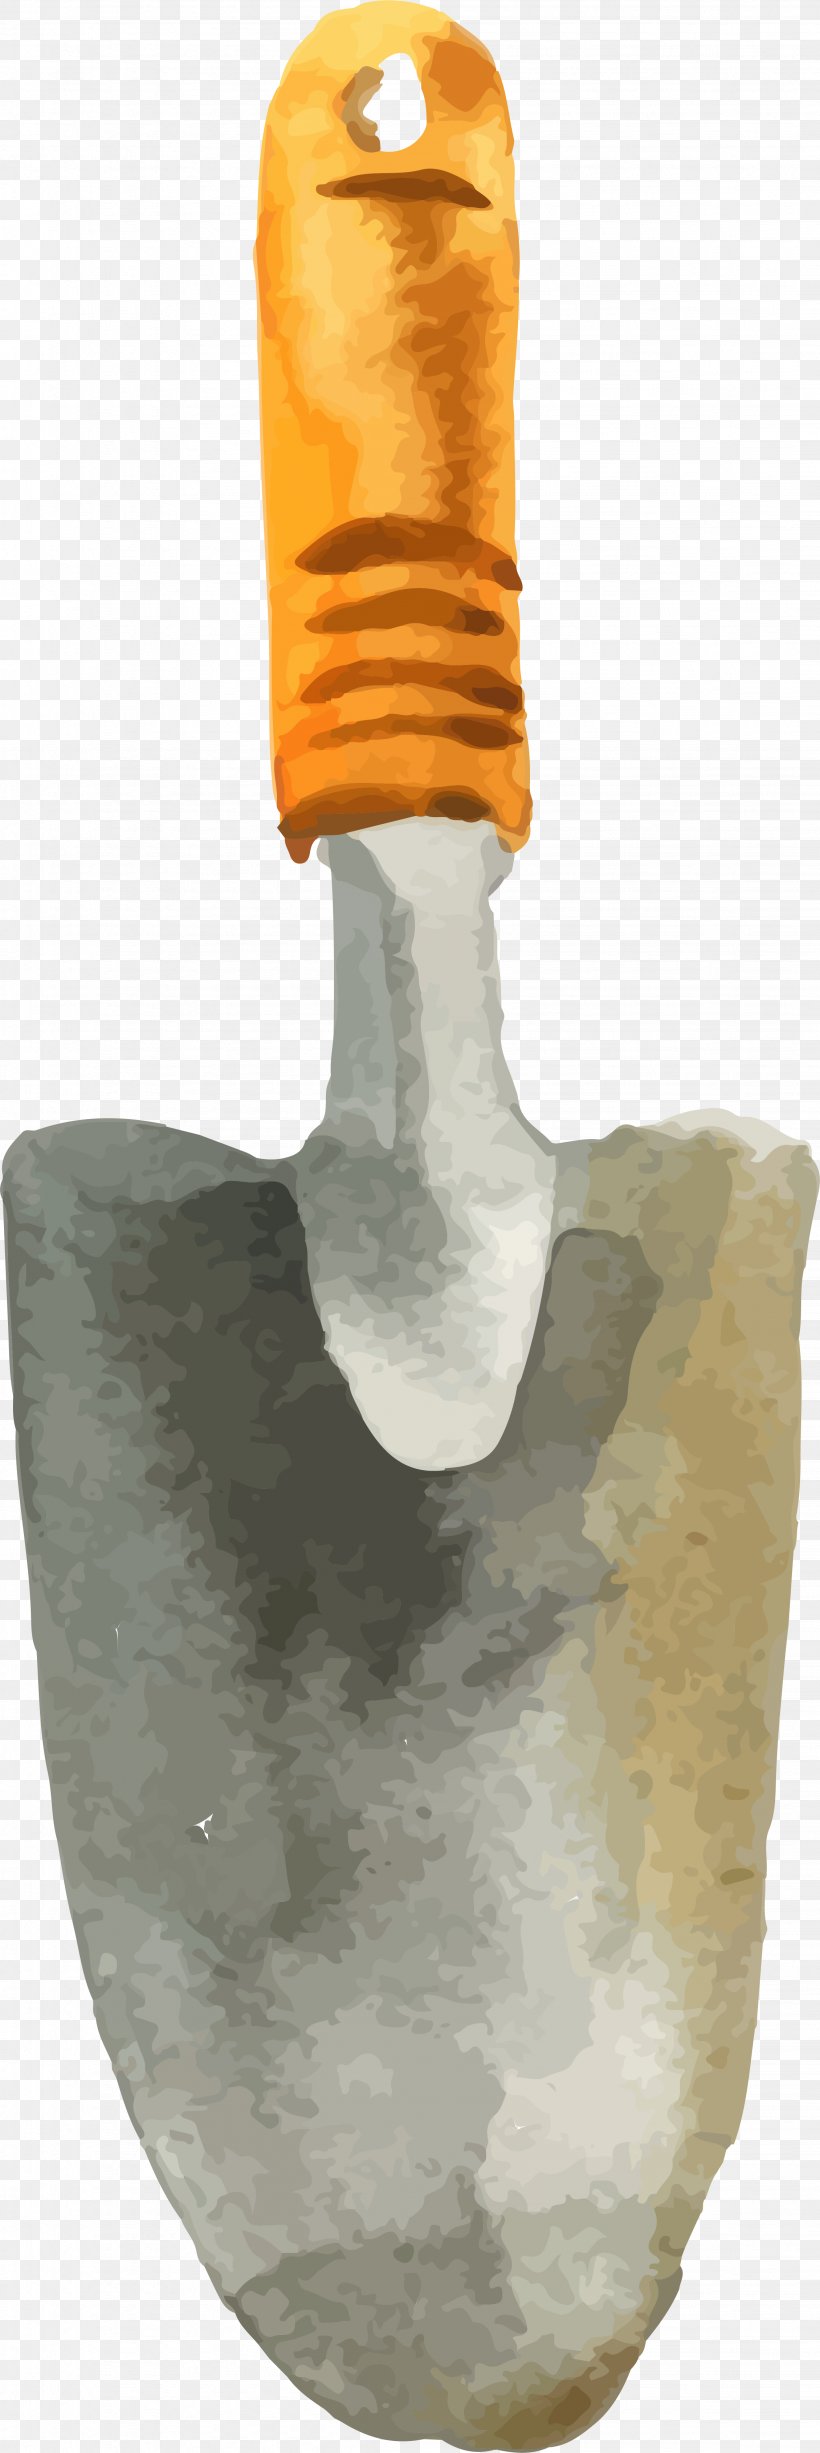 Shovel, PNG, 2259x6758px, Shovel, Cartoon, Earth, Finger, Watercolor Painting Download Free